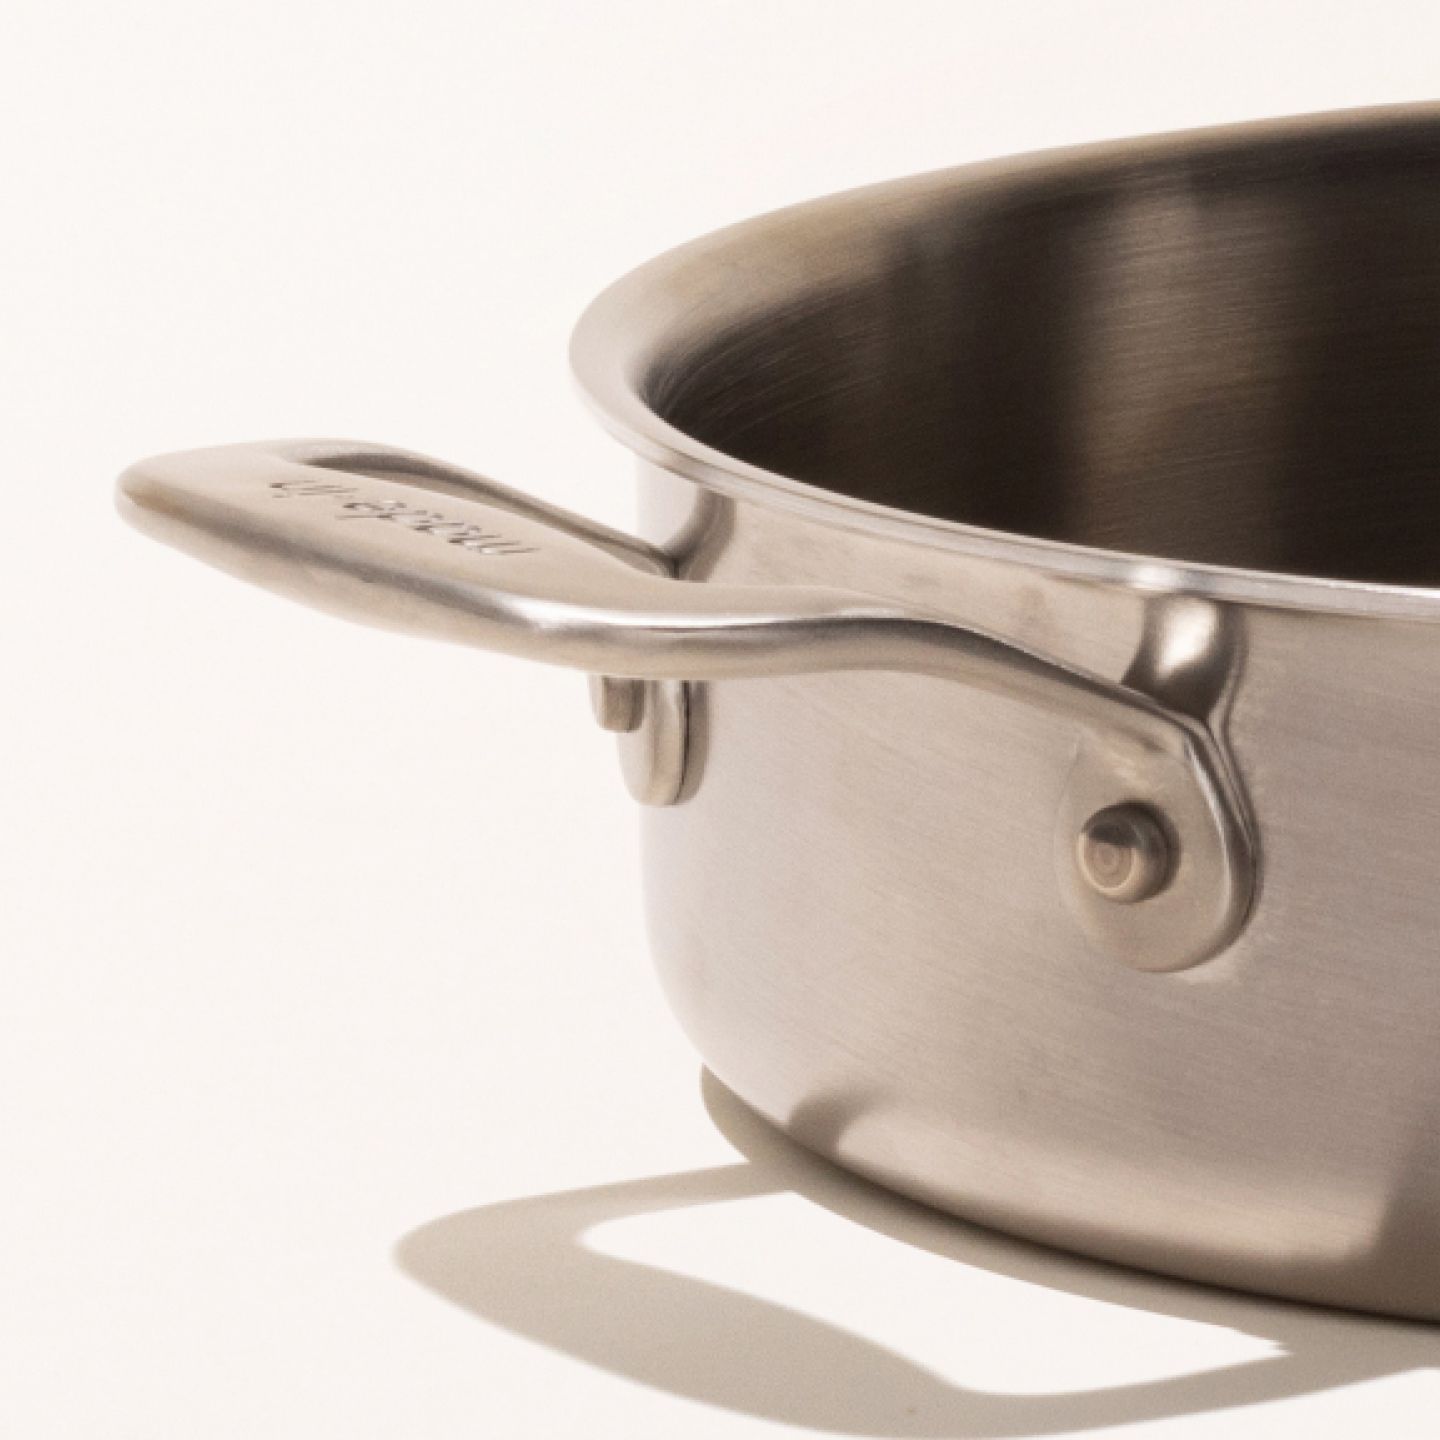 ALL-CLAD Stainless 2-Qt Sauce Pan - Signature Art Ware